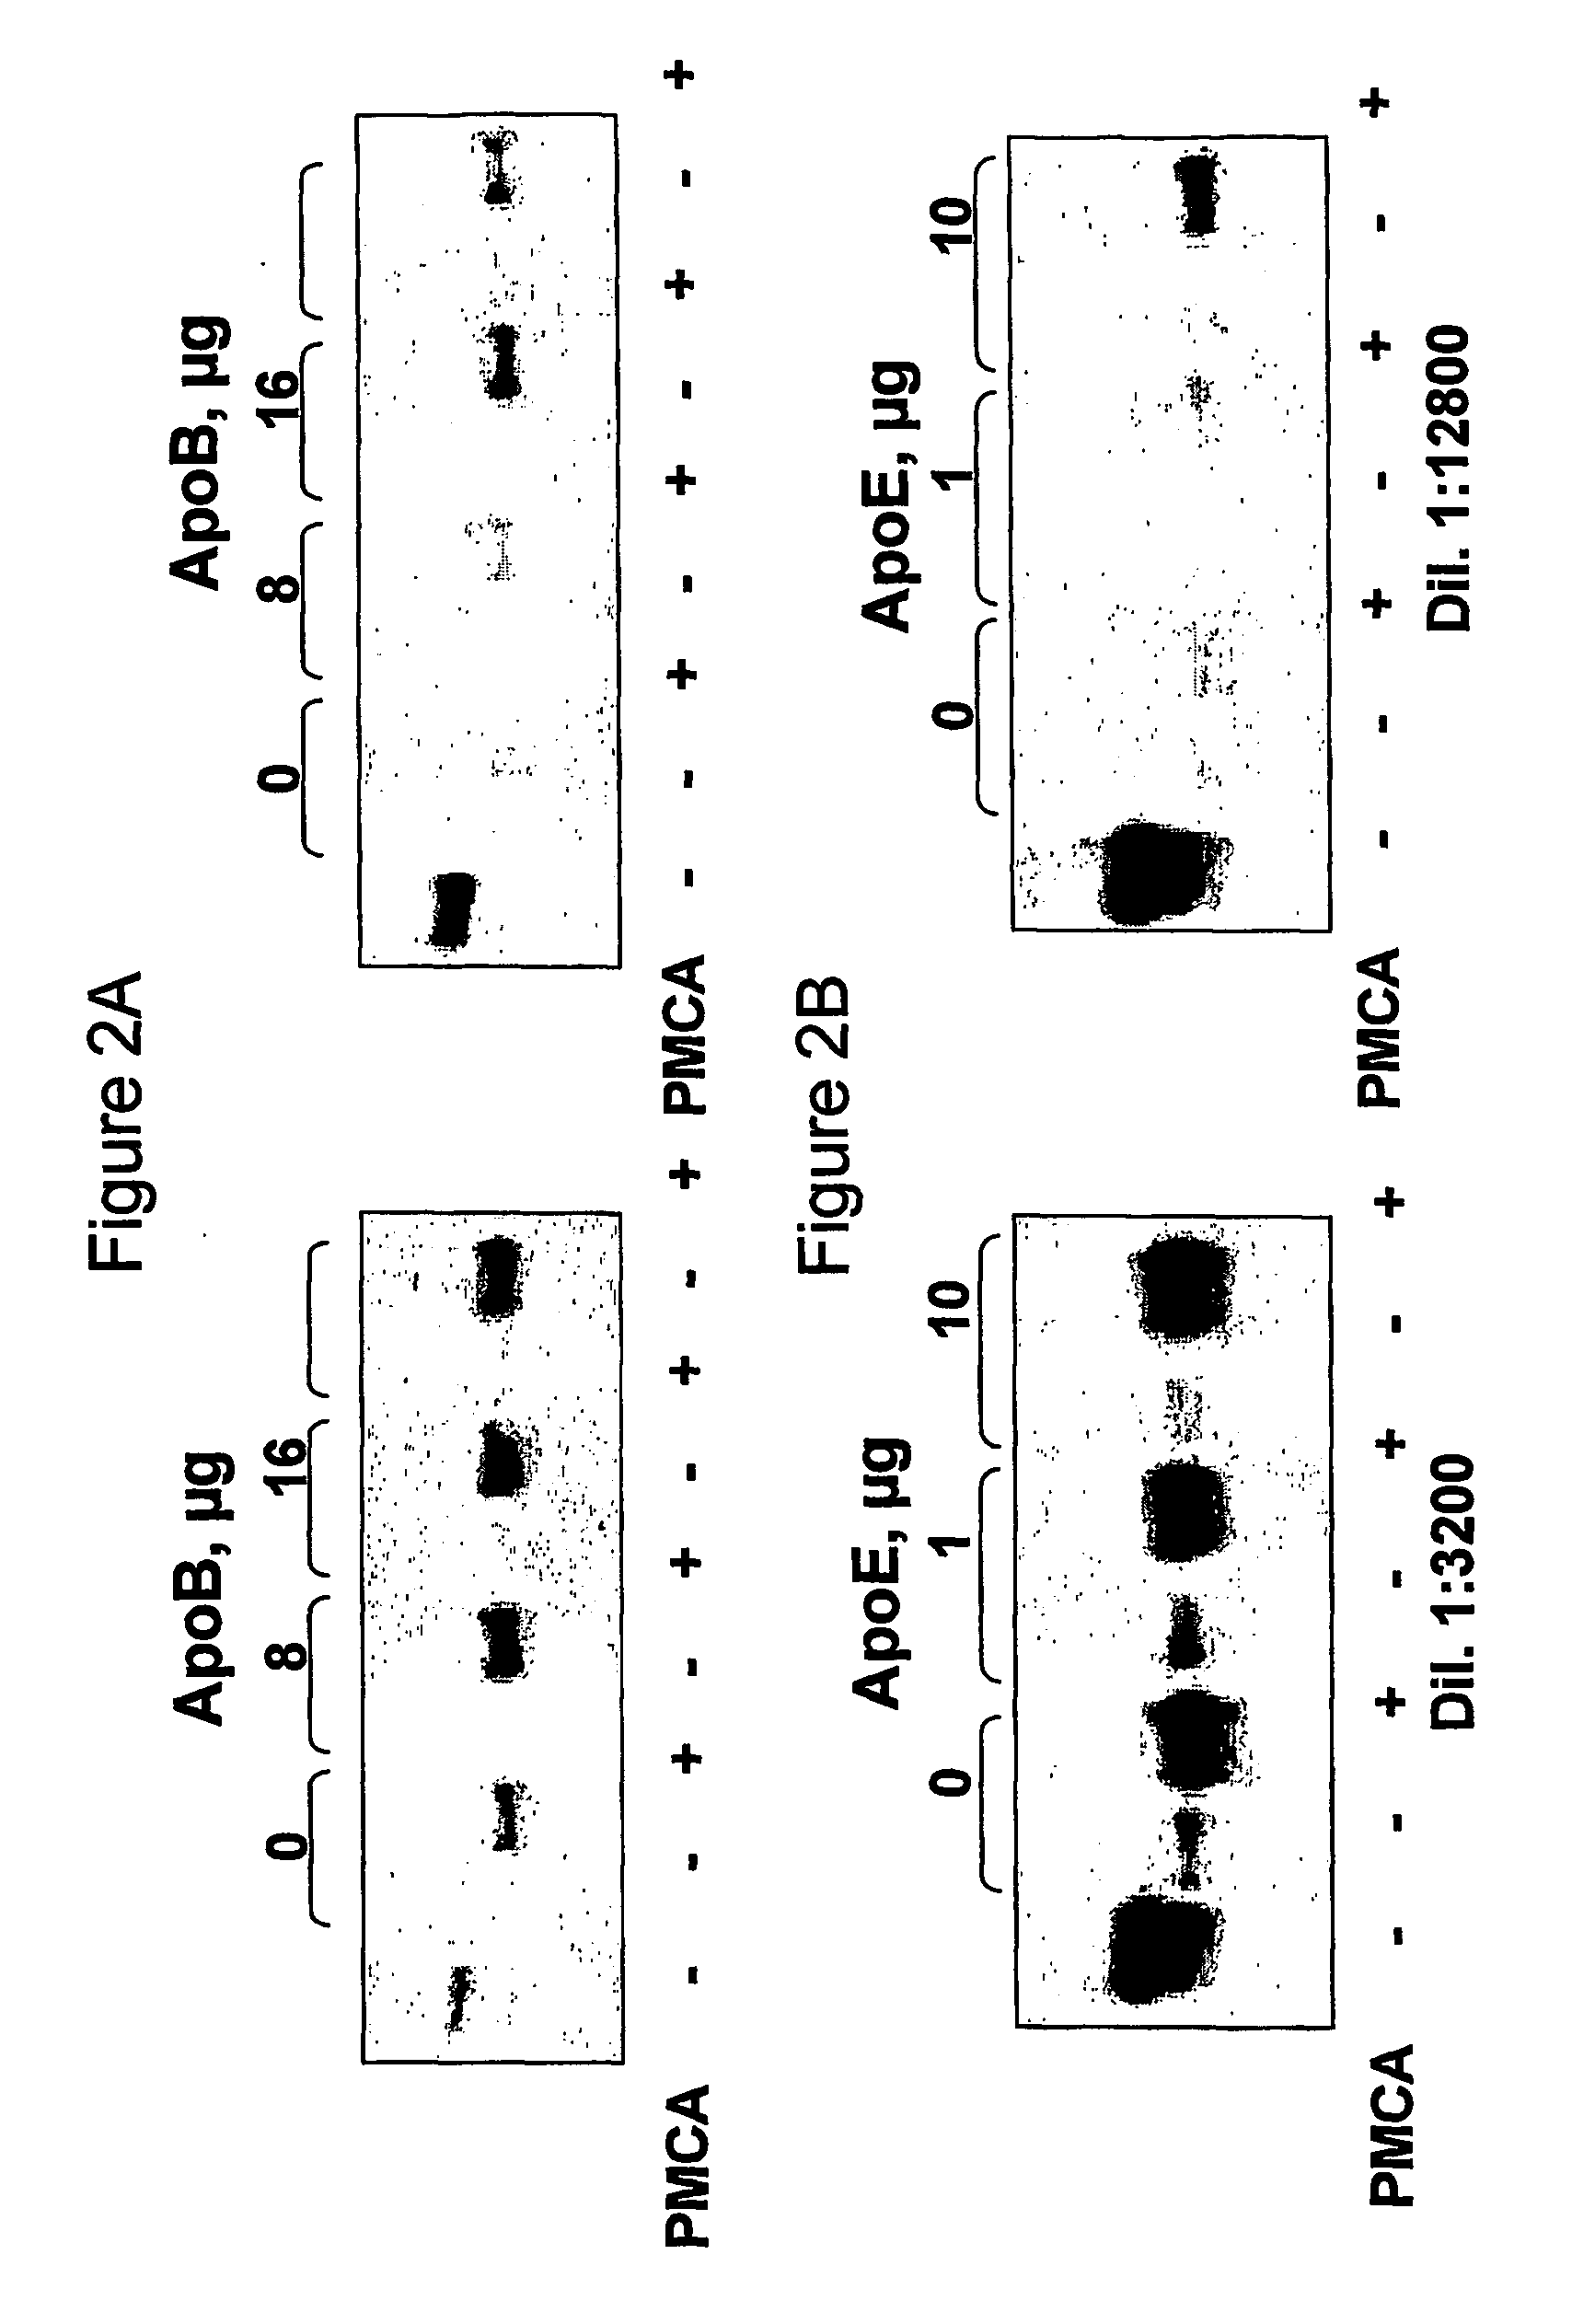 Use of prion conversion modulating agents